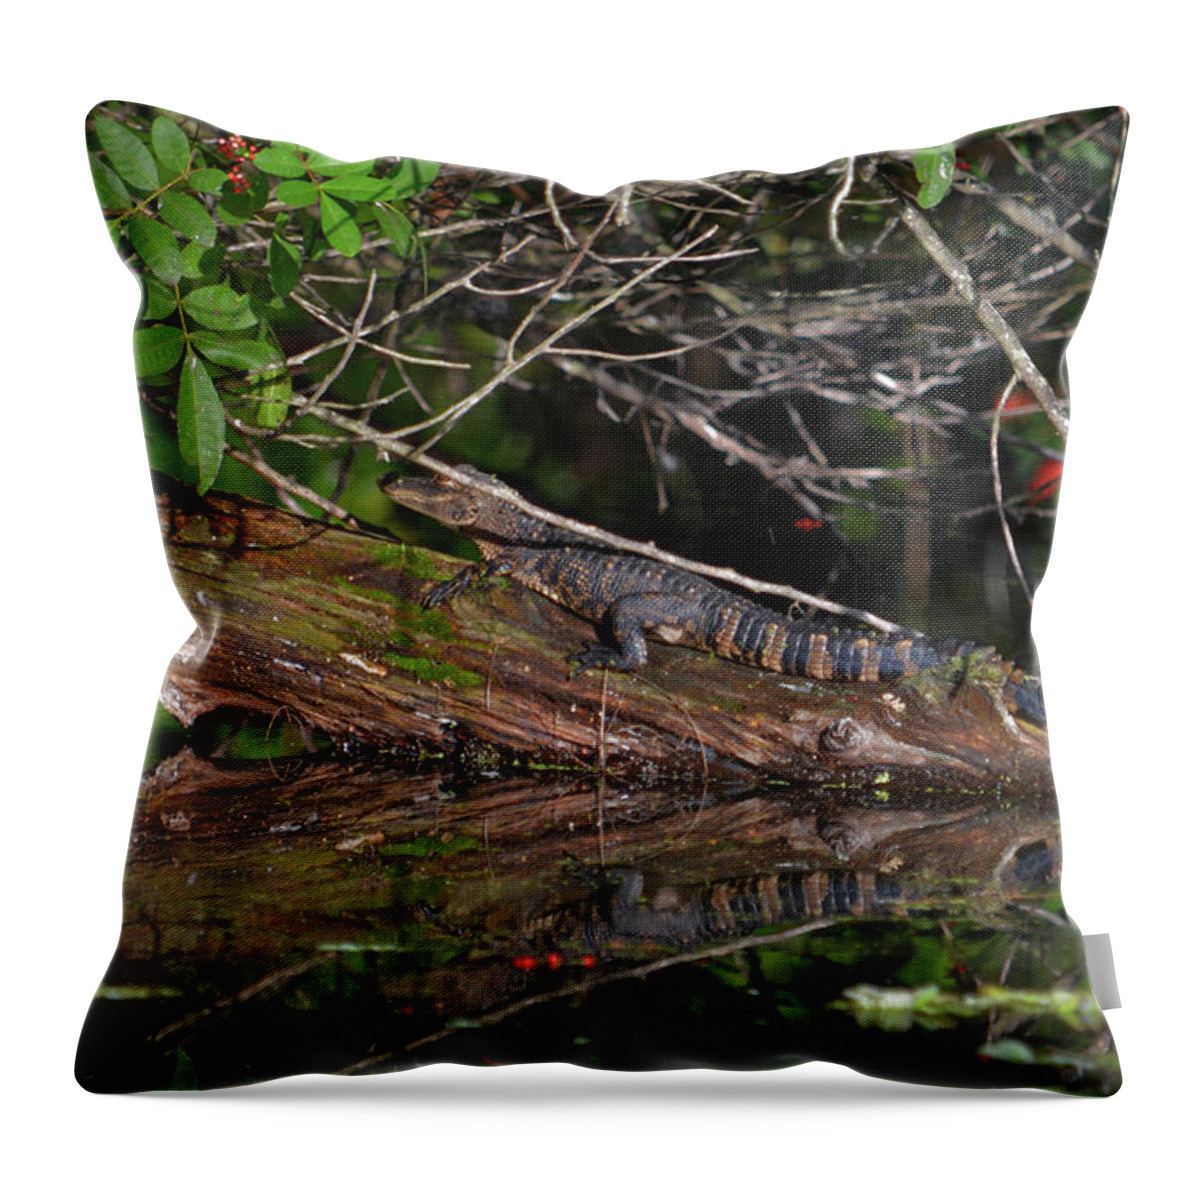  Throw Pillow featuring the photograph 27- Juvenile Alligator by Joseph Keane